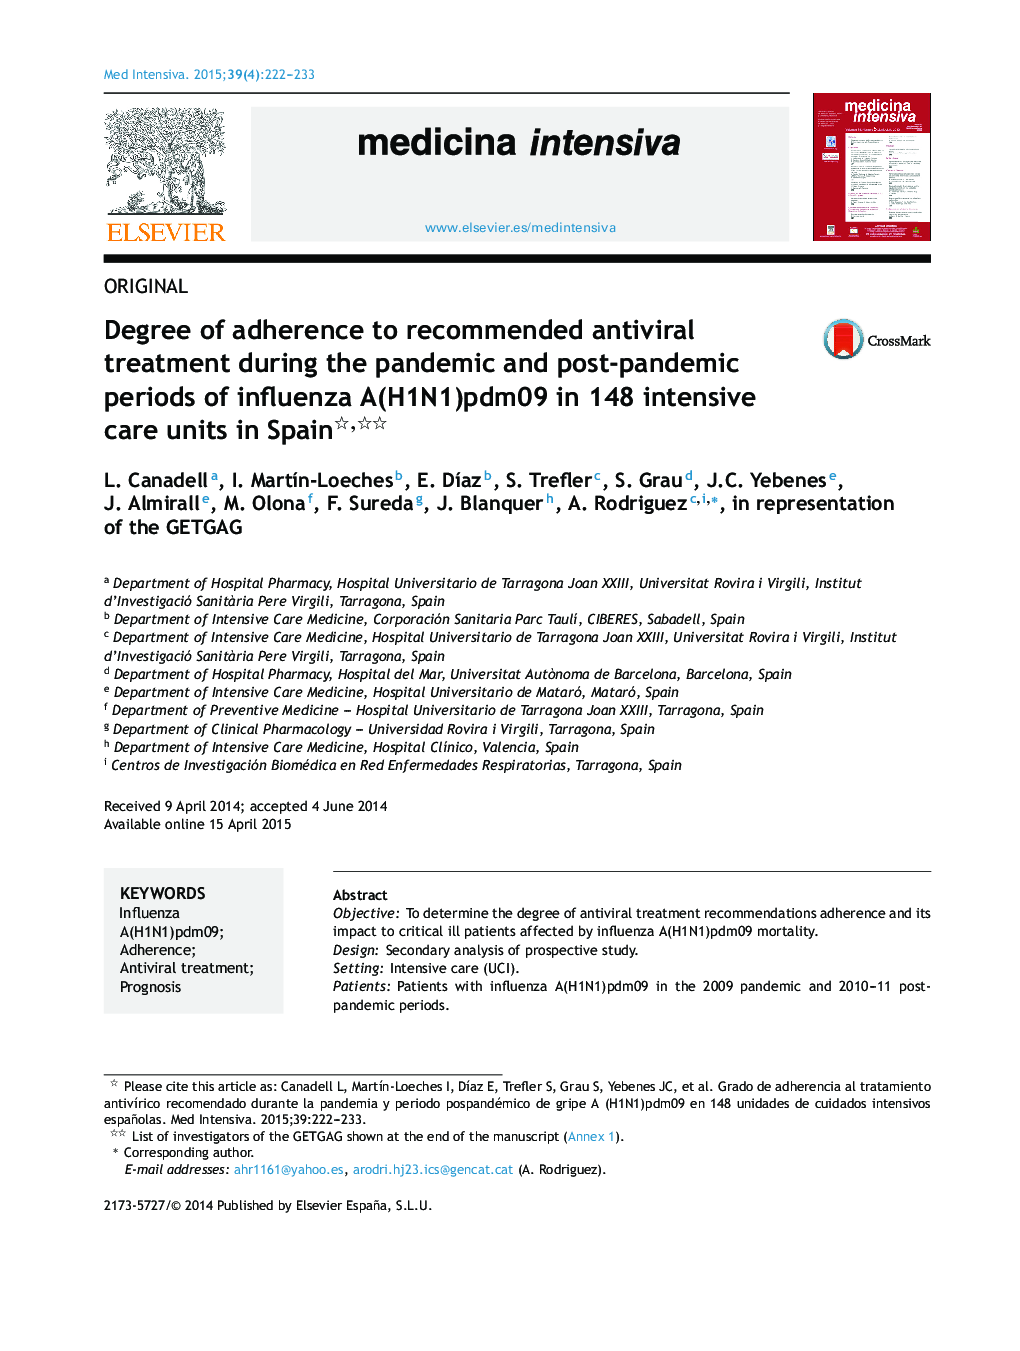 Degree of adherence to recommended antiviral treatment during the pandemic and post-pandemic periods of influenza A(H1N1)pdm09 in 148 intensive care units in Spain 